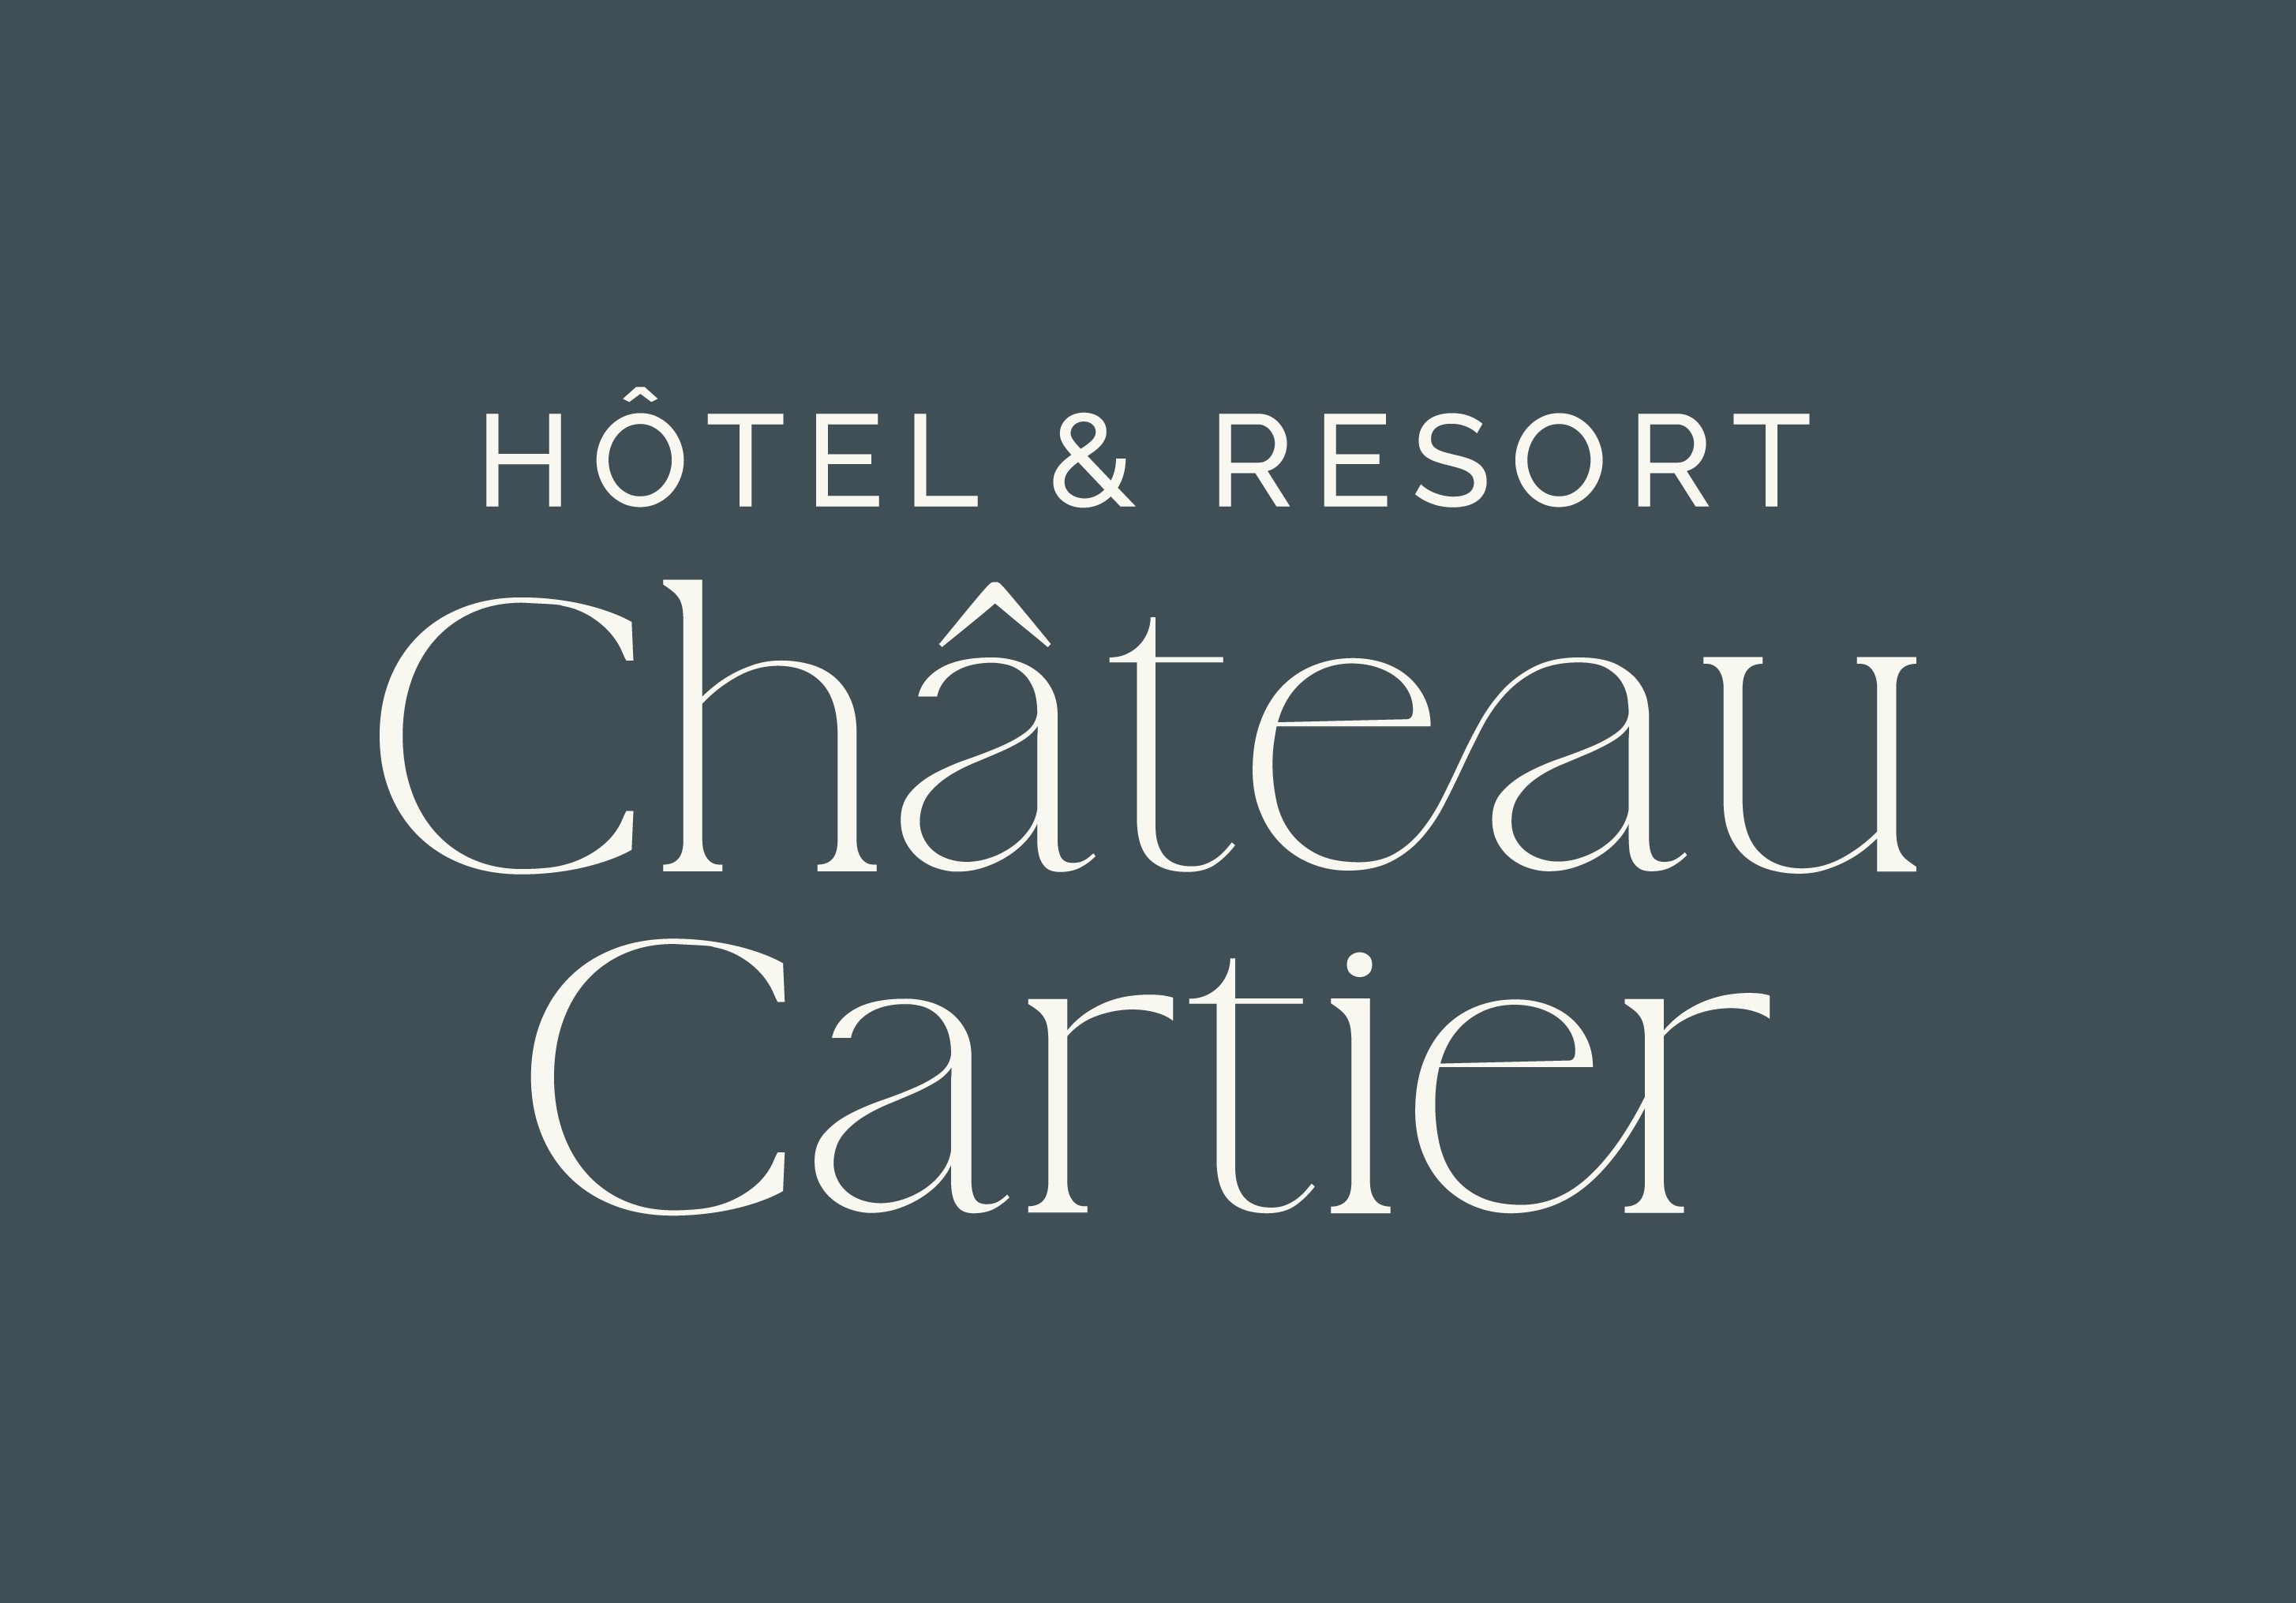 Chateau Cartier Hotel & Resort